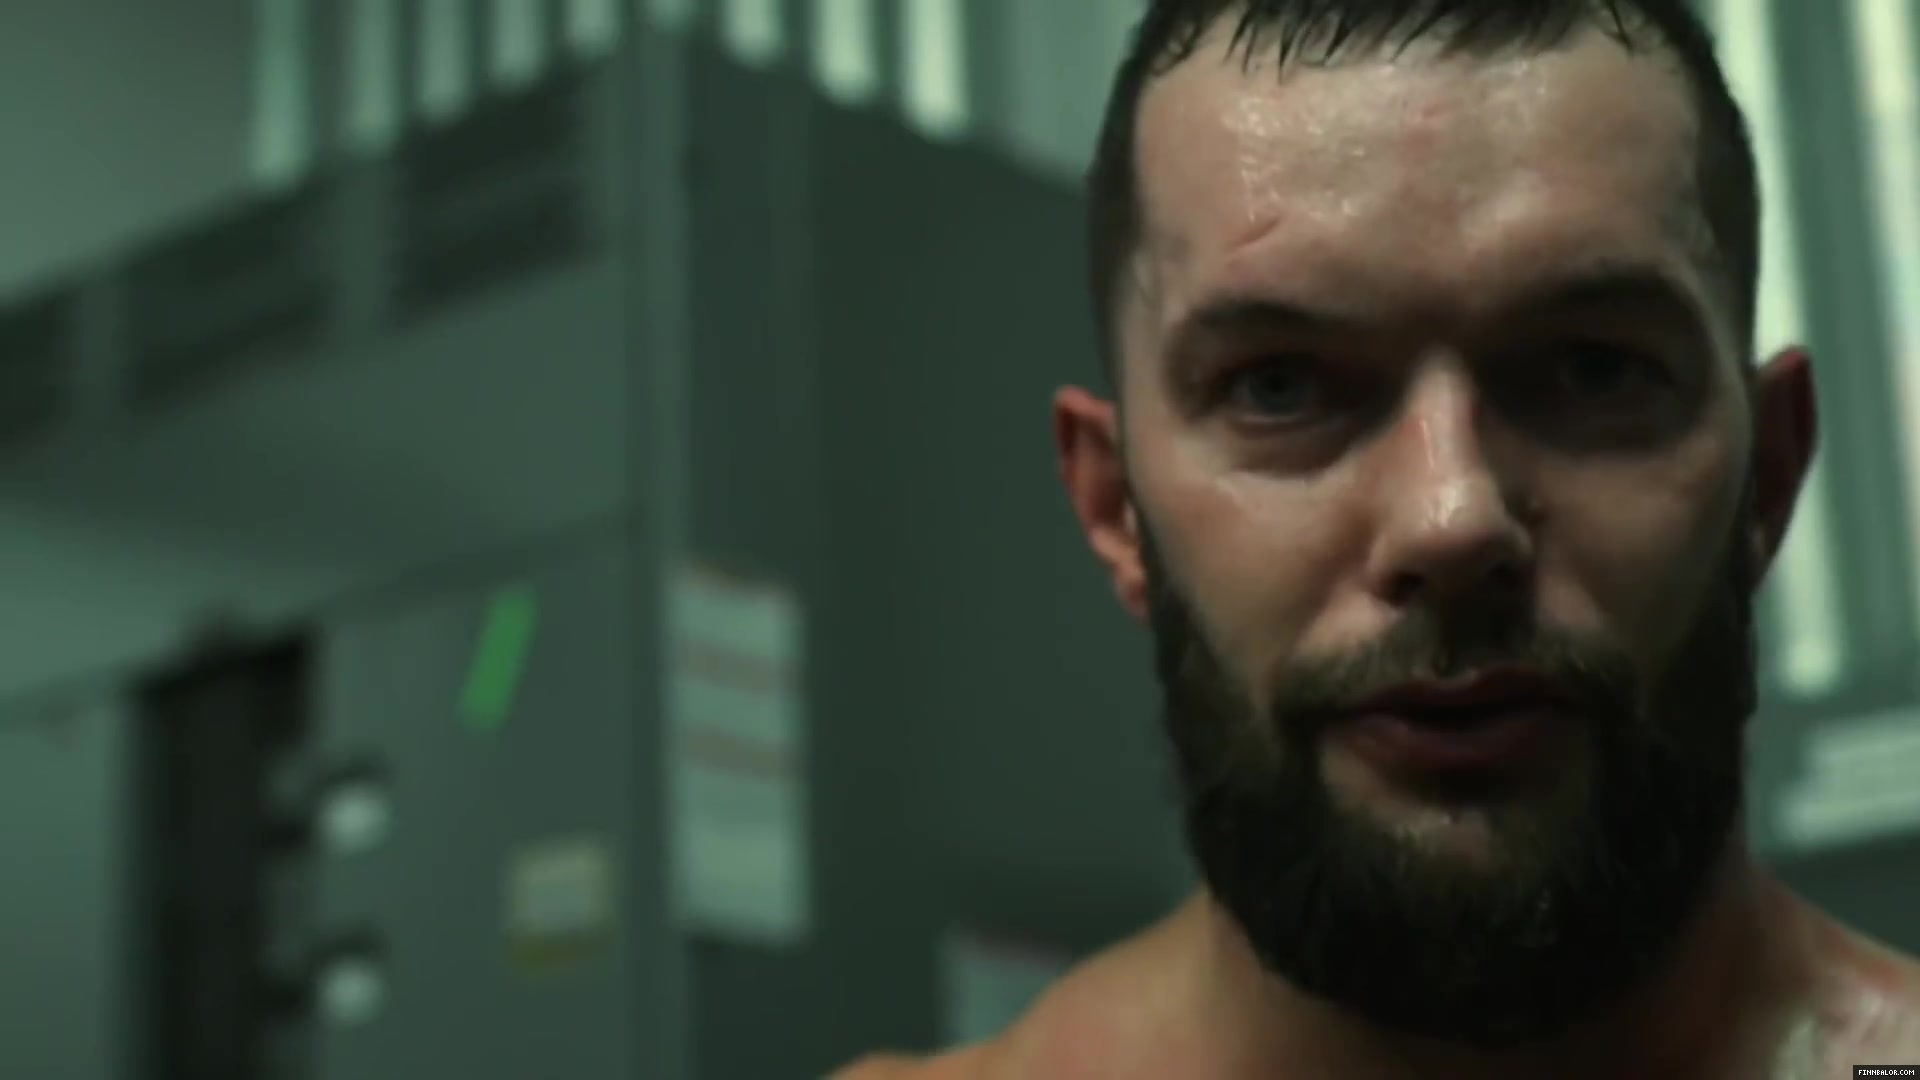 Finn_Balor___The_Rising_of_the_Prince_in_NXT_605.jpg